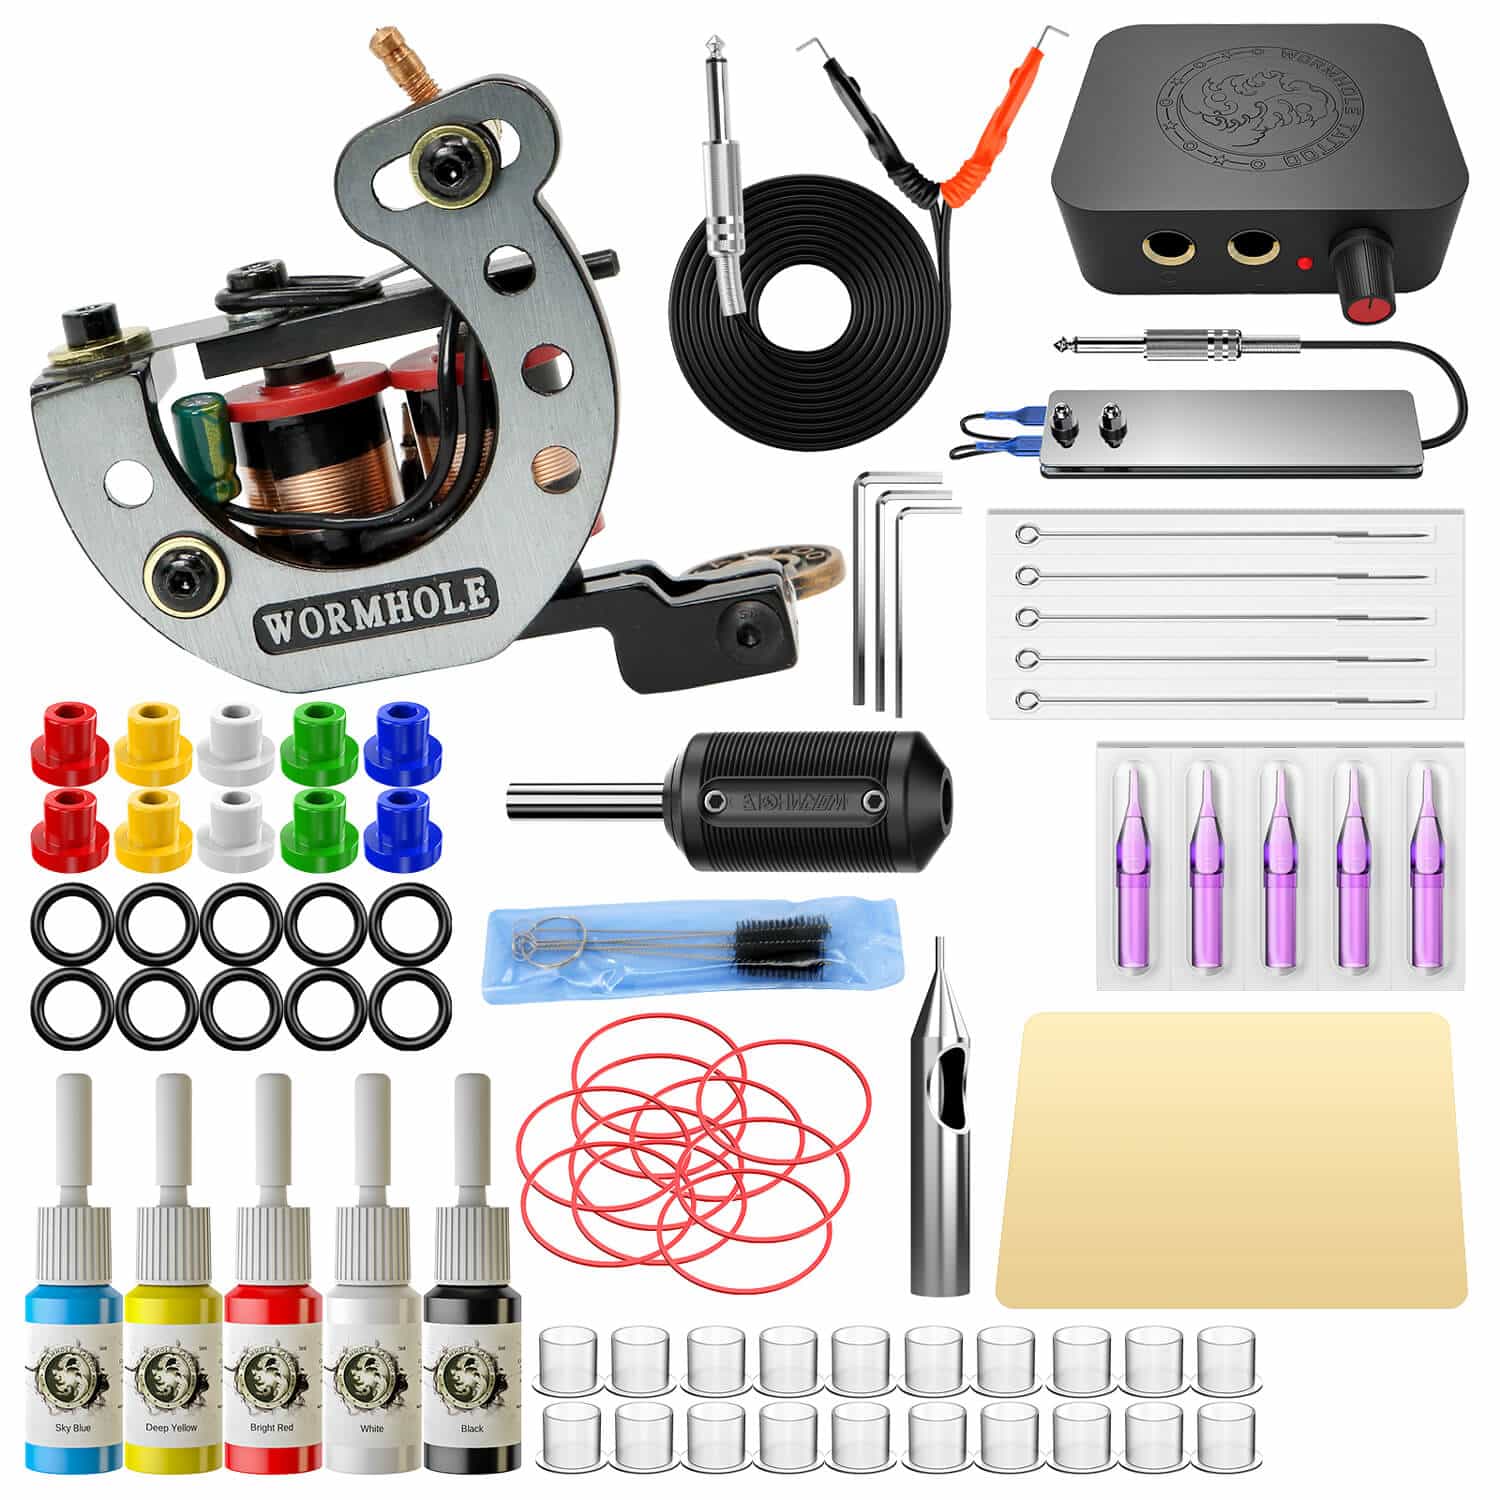 Tattoo Gun Kit for Beginners with 4PC Tattoo Ink Set 5 Tattoo Need le Tattoo  Grip Complete Professional Tattoo Supplies Kit : Amazon.ca: Beauty &  Personal Care